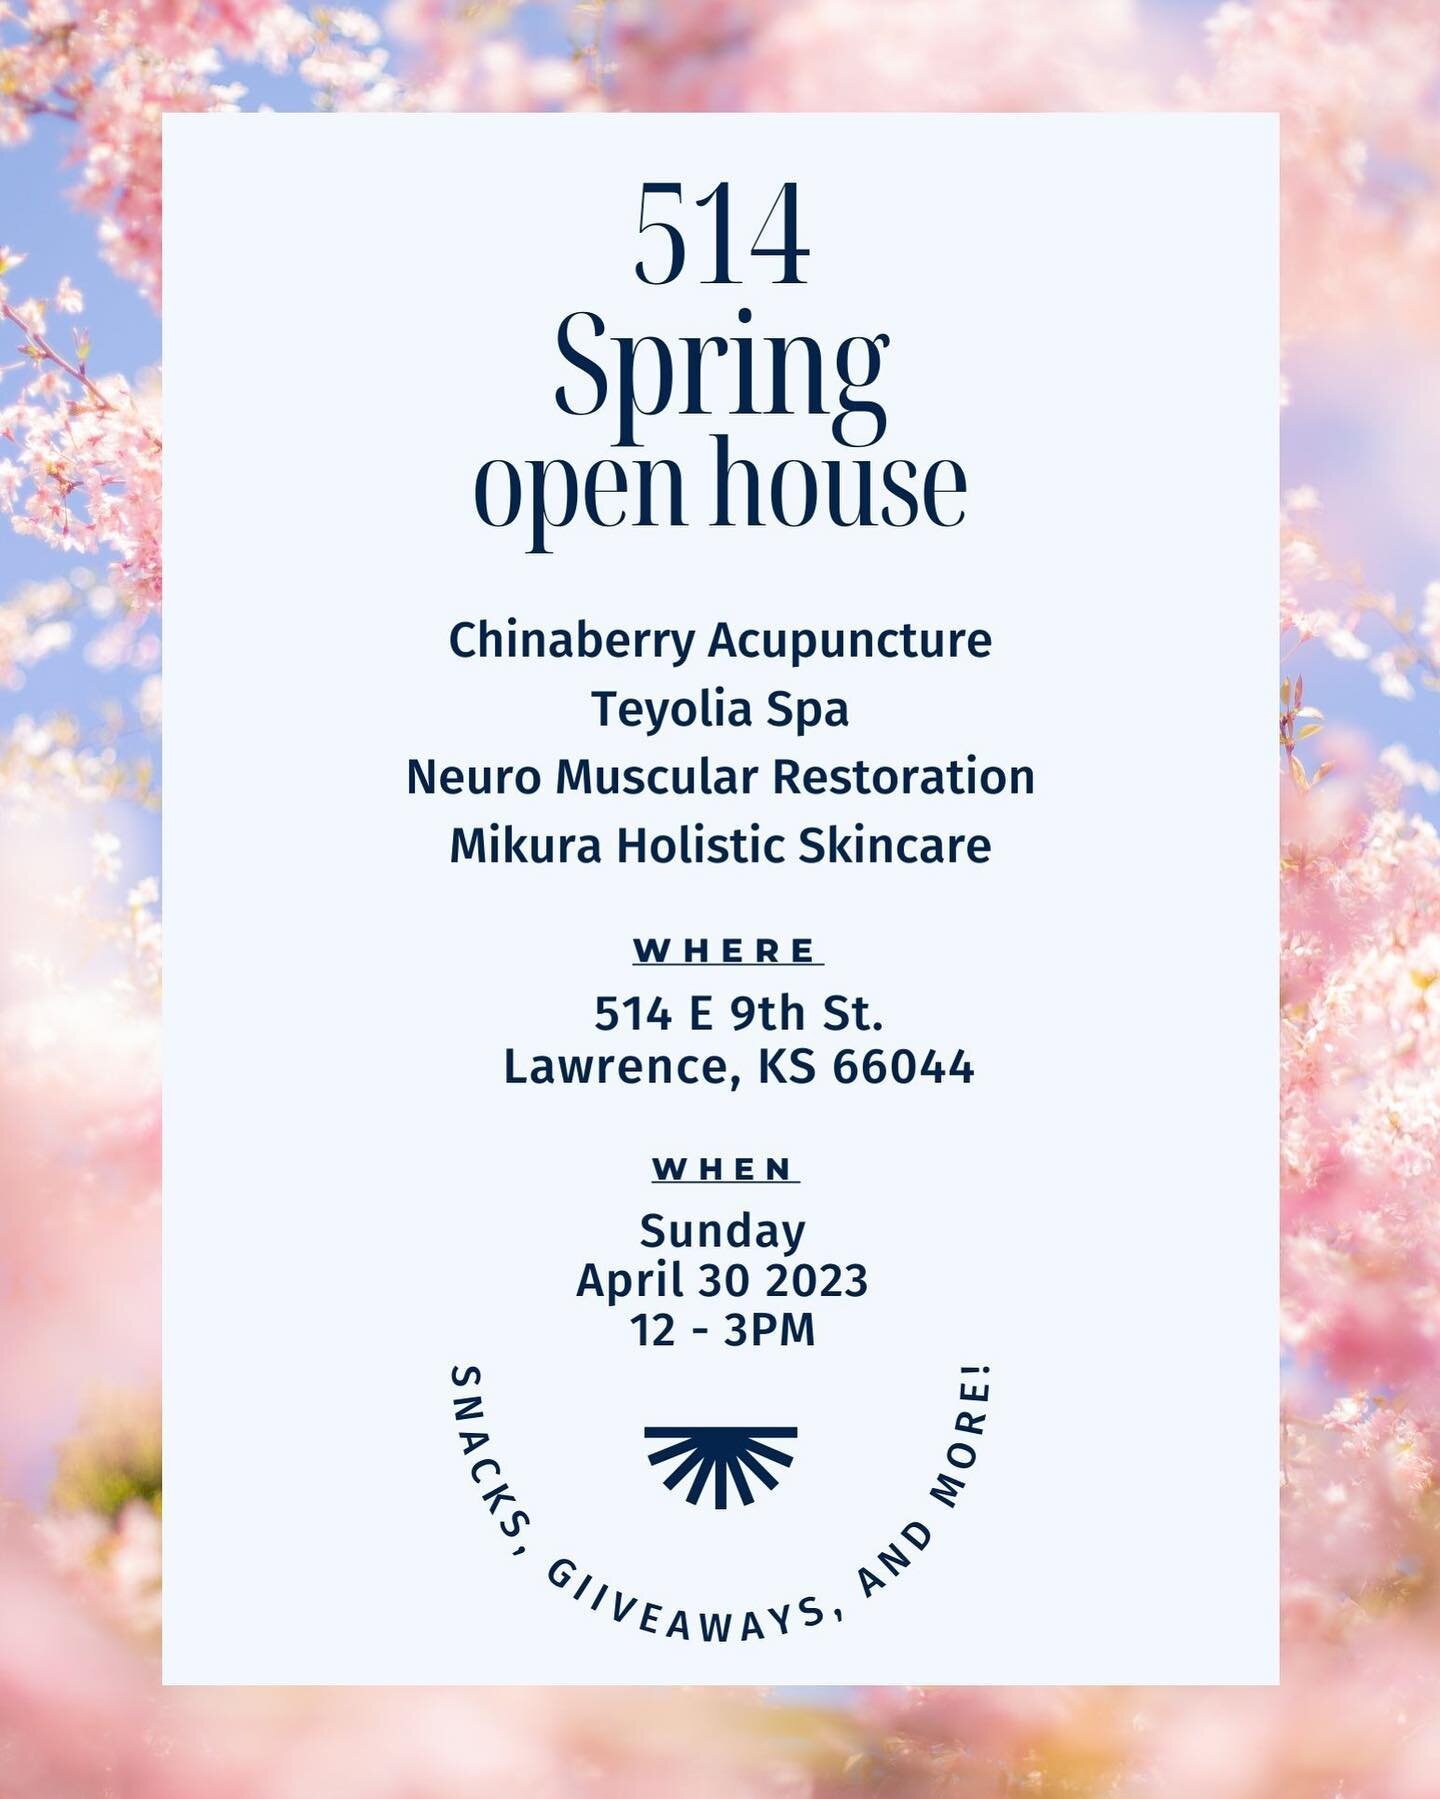 Hello all! 

Me and the girls at the 514 building are having a small open house party at the end of the month! Melea from @chinaberry_acupuncture will be offering free ear seeds and acupuncture and Jessica from @teyoliaspa will have a few giveaway op